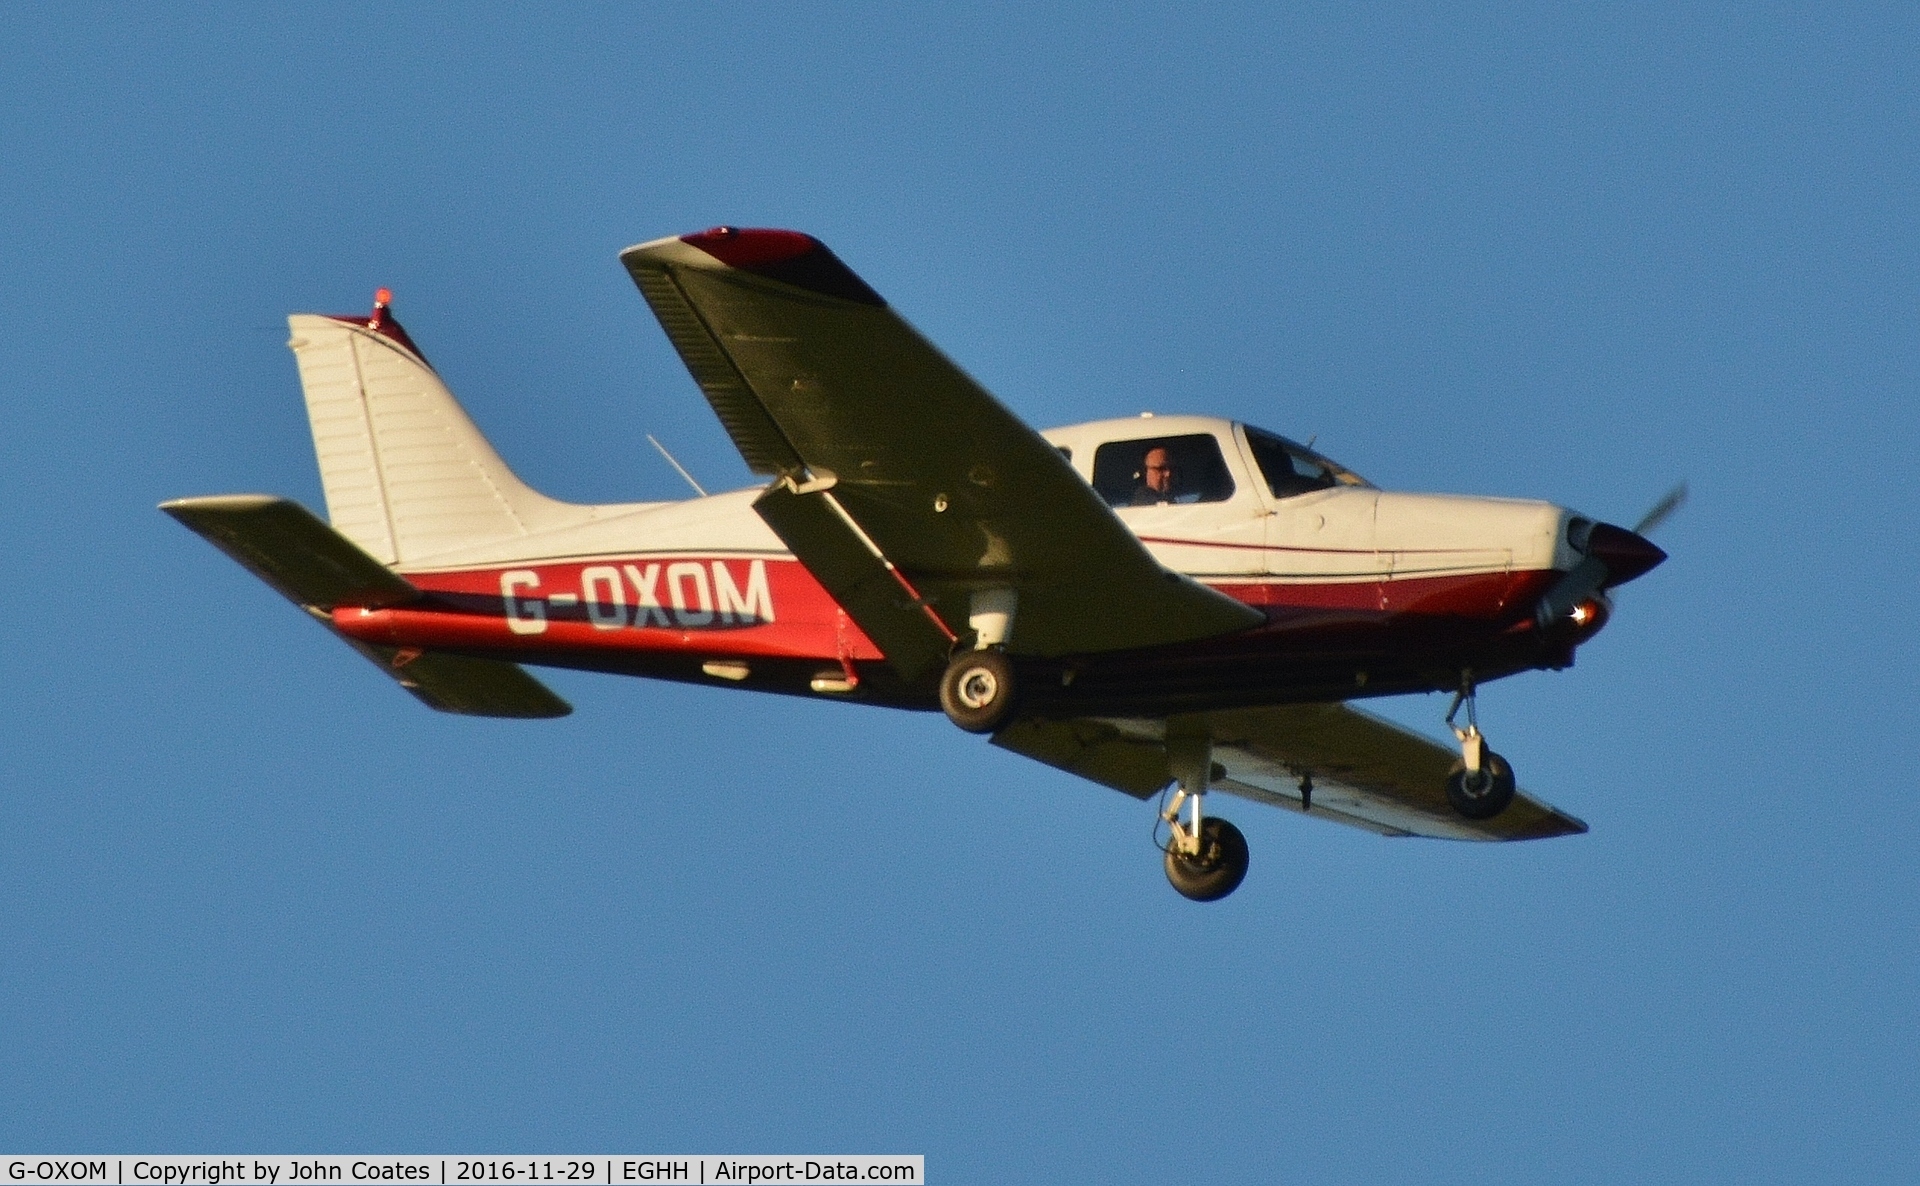 G-OXOM, 1989 Piper PA-28-161 Cadet C/N 28-41285, On approach to 08